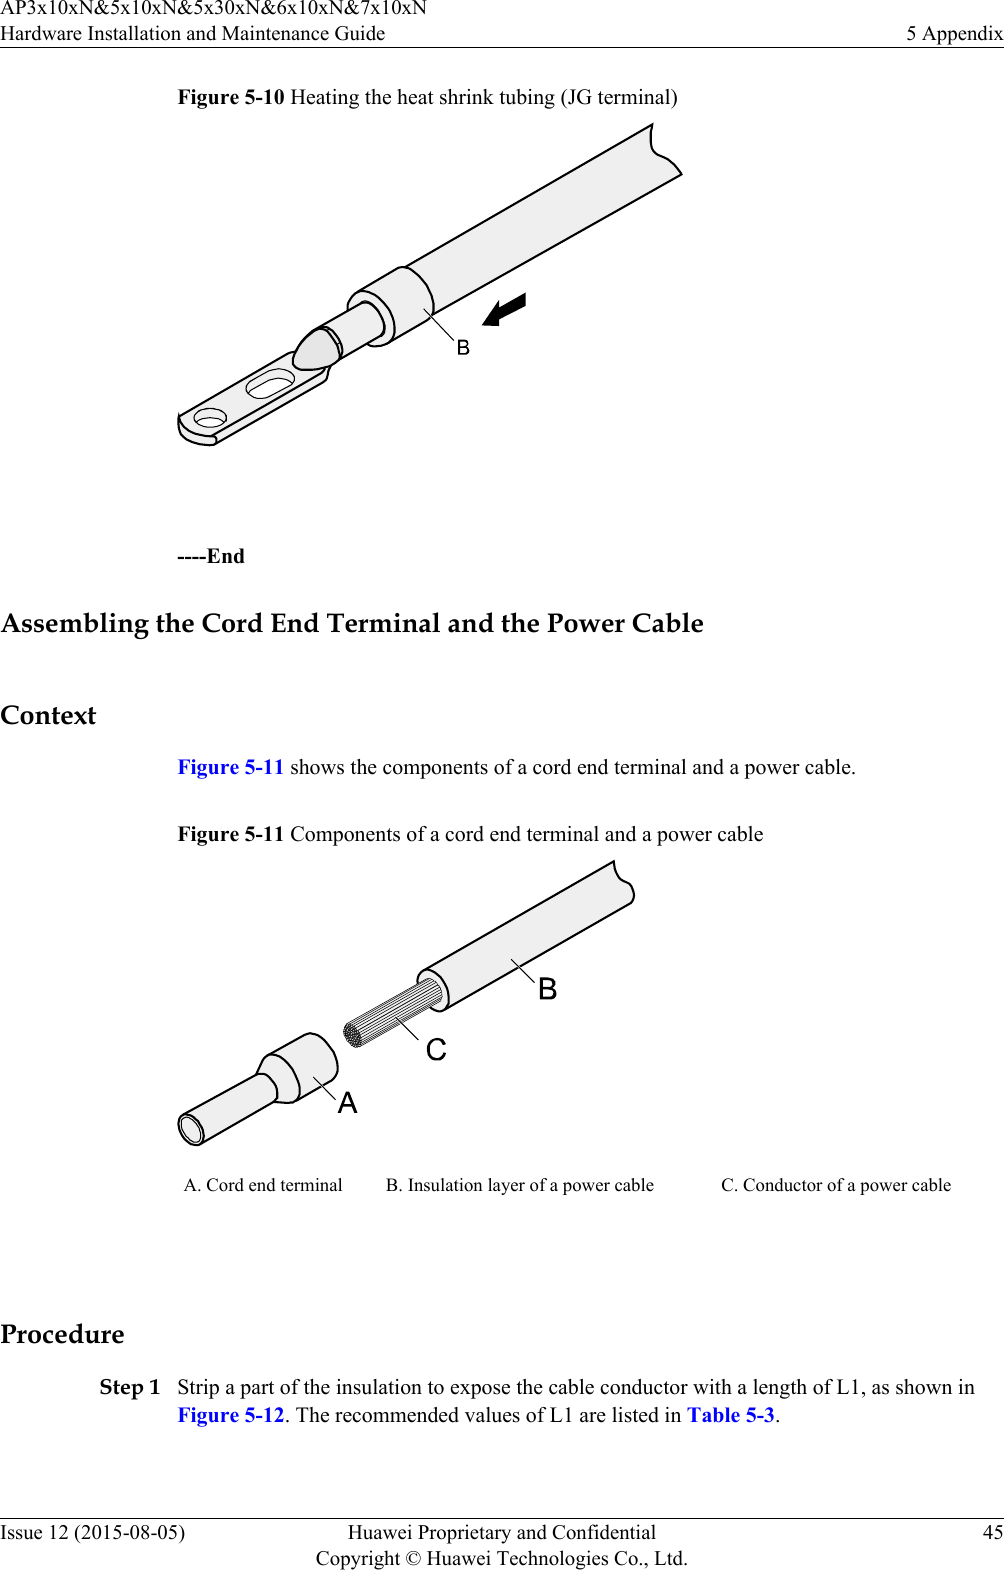 Figure 5-10 Heating the heat shrink tubing (JG terminal) ----EndAssembling the Cord End Terminal and the Power CableContextFigure 5-11 shows the components of a cord end terminal and a power cable.Figure 5-11 Components of a cord end terminal and a power cableA. Cord end terminal B. Insulation layer of a power cable C. Conductor of a power cable ProcedureStep 1 Strip a part of the insulation to expose the cable conductor with a length of L1, as shown inFigure 5-12. The recommended values of L1 are listed in Table 5-3.AP3x10xN&amp;5x10xN&amp;5x30xN&amp;6x10xN&amp;7x10xNHardware Installation and Maintenance Guide 5 AppendixIssue 12 (2015-08-05) Huawei Proprietary and ConfidentialCopyright © Huawei Technologies Co., Ltd.45